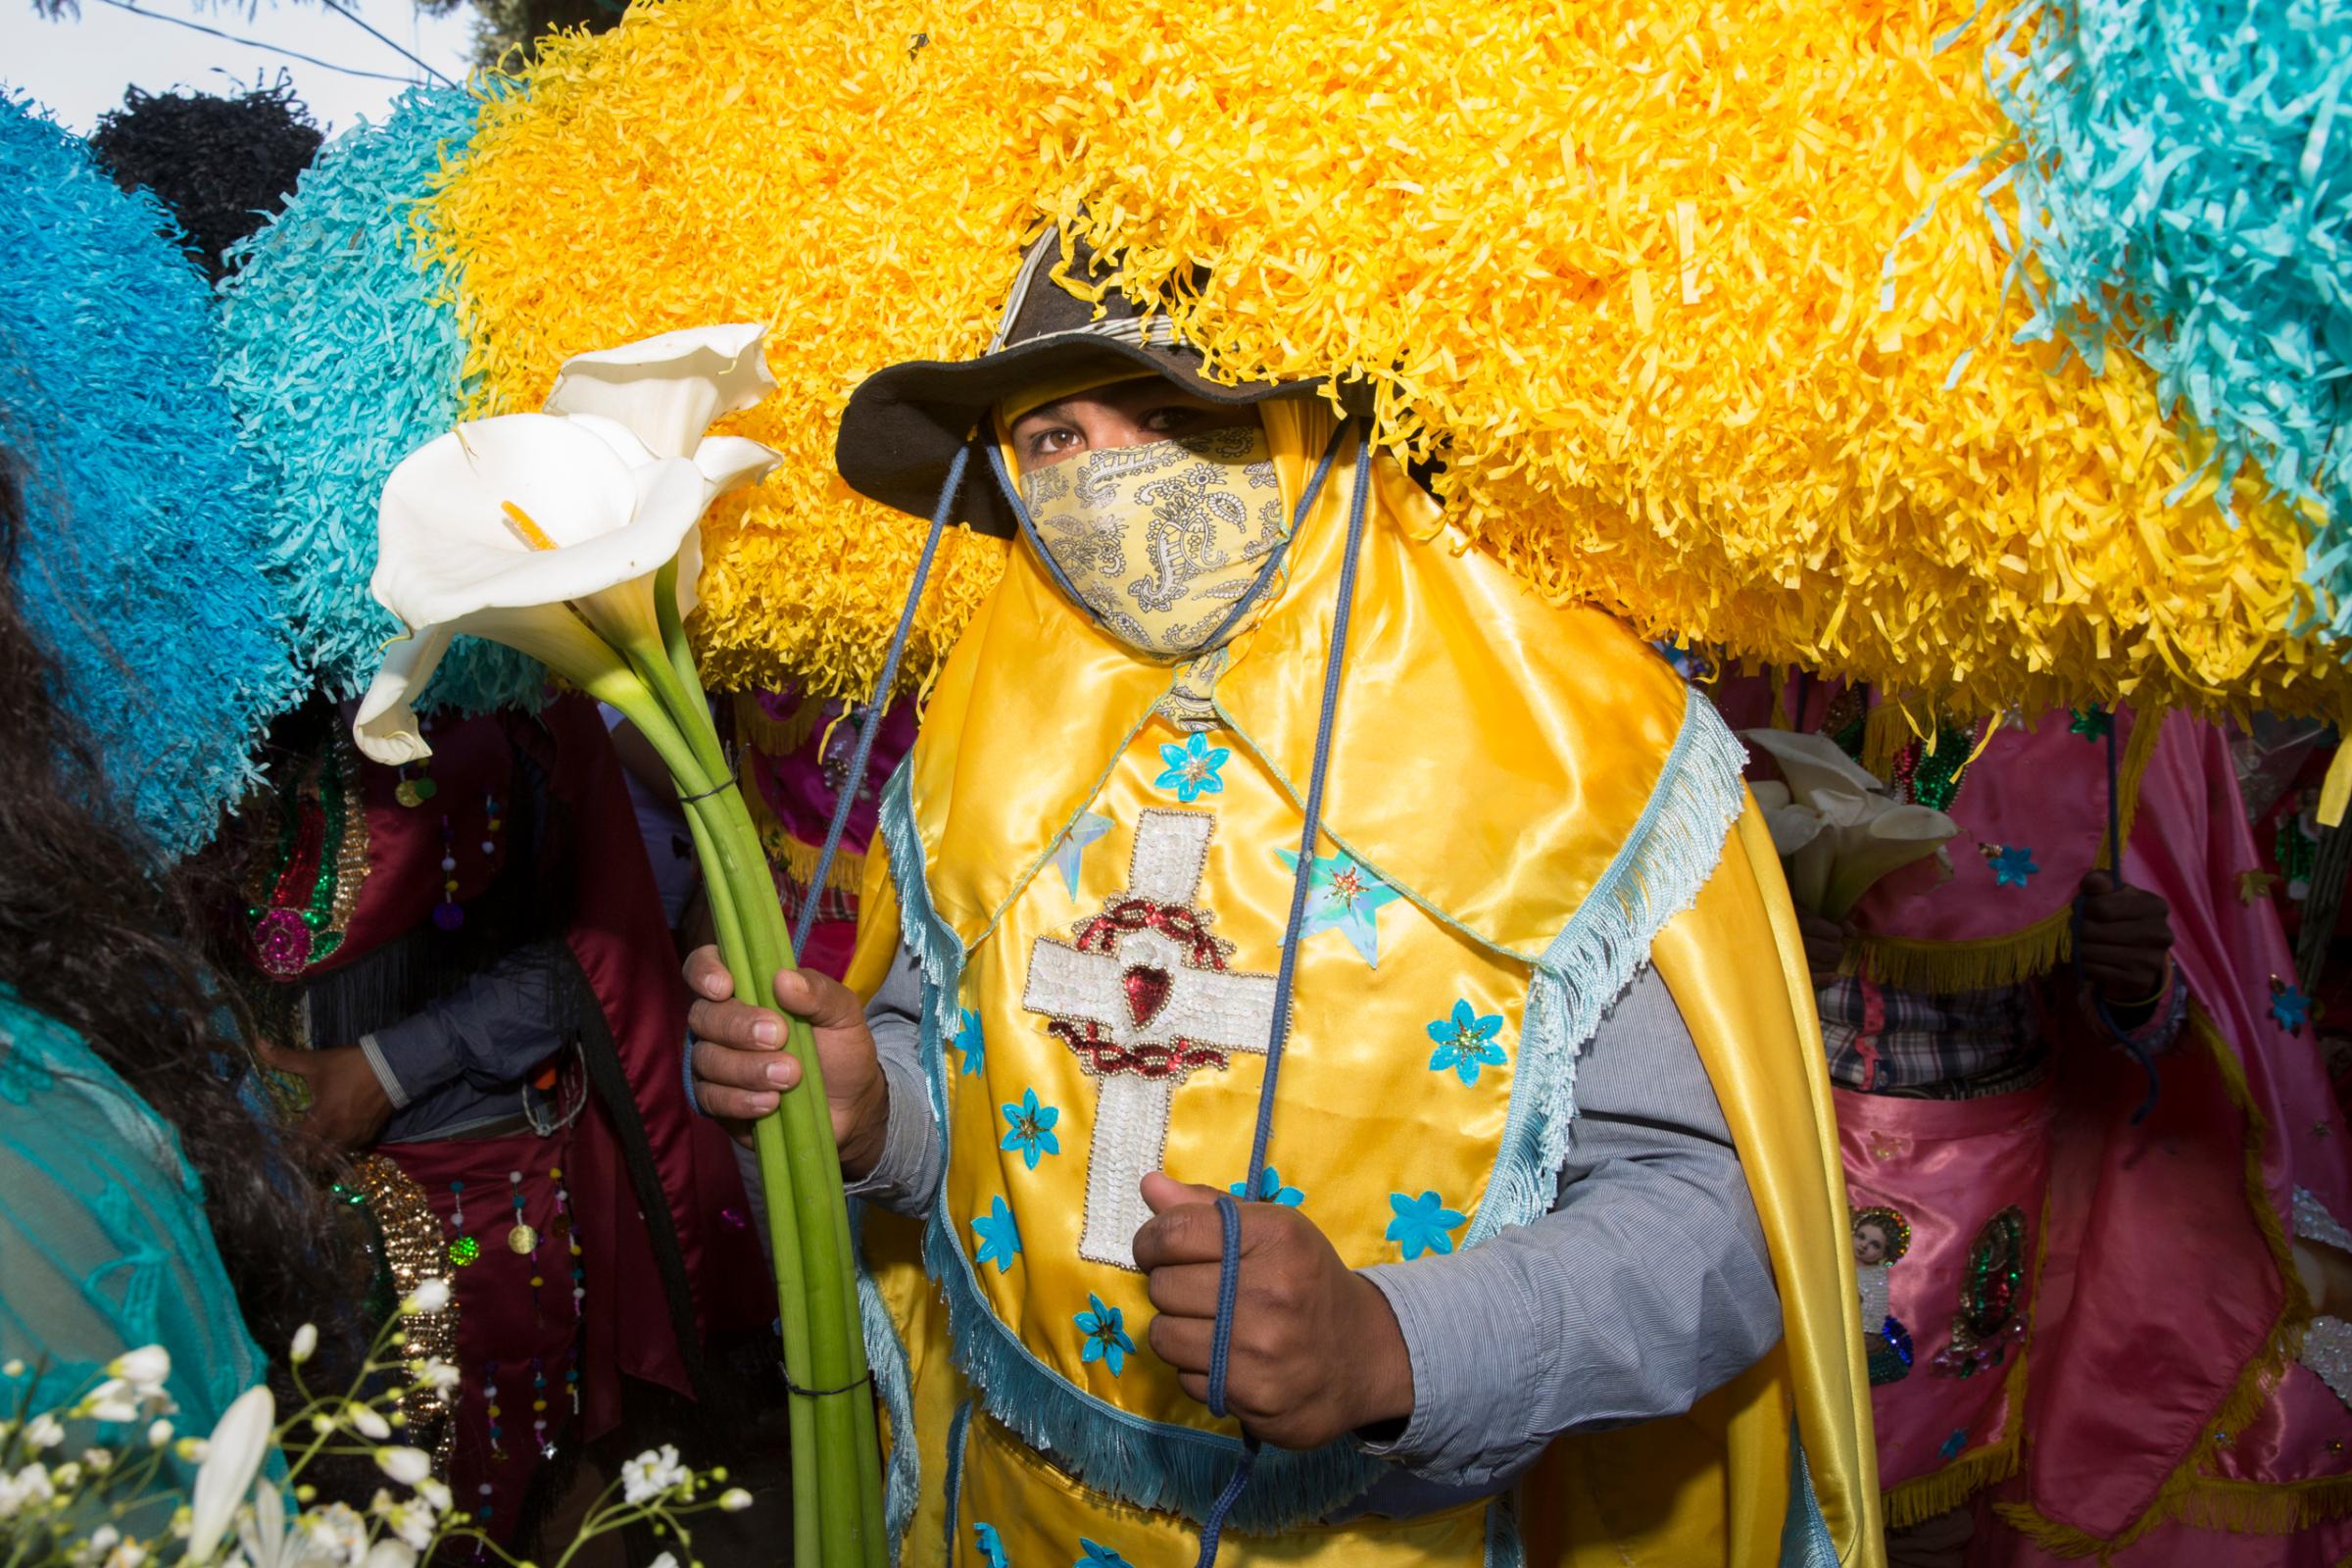 A young man dressed as a Sayone holds a flower during the Sunday procession of Holy Week in Tetela del Volcan, Morelos, Mexico. The Sayones, impersonate the Roman soldiers who killed Jesus. They wear brightly colored costumes with figures of saints, hold machetes, wear goat skin leather mask and paper hats. After the mass that ends Holy Week on Sunday people throw lit matches at them to set their hats on fire, in sign of vengeance for their murderous act.